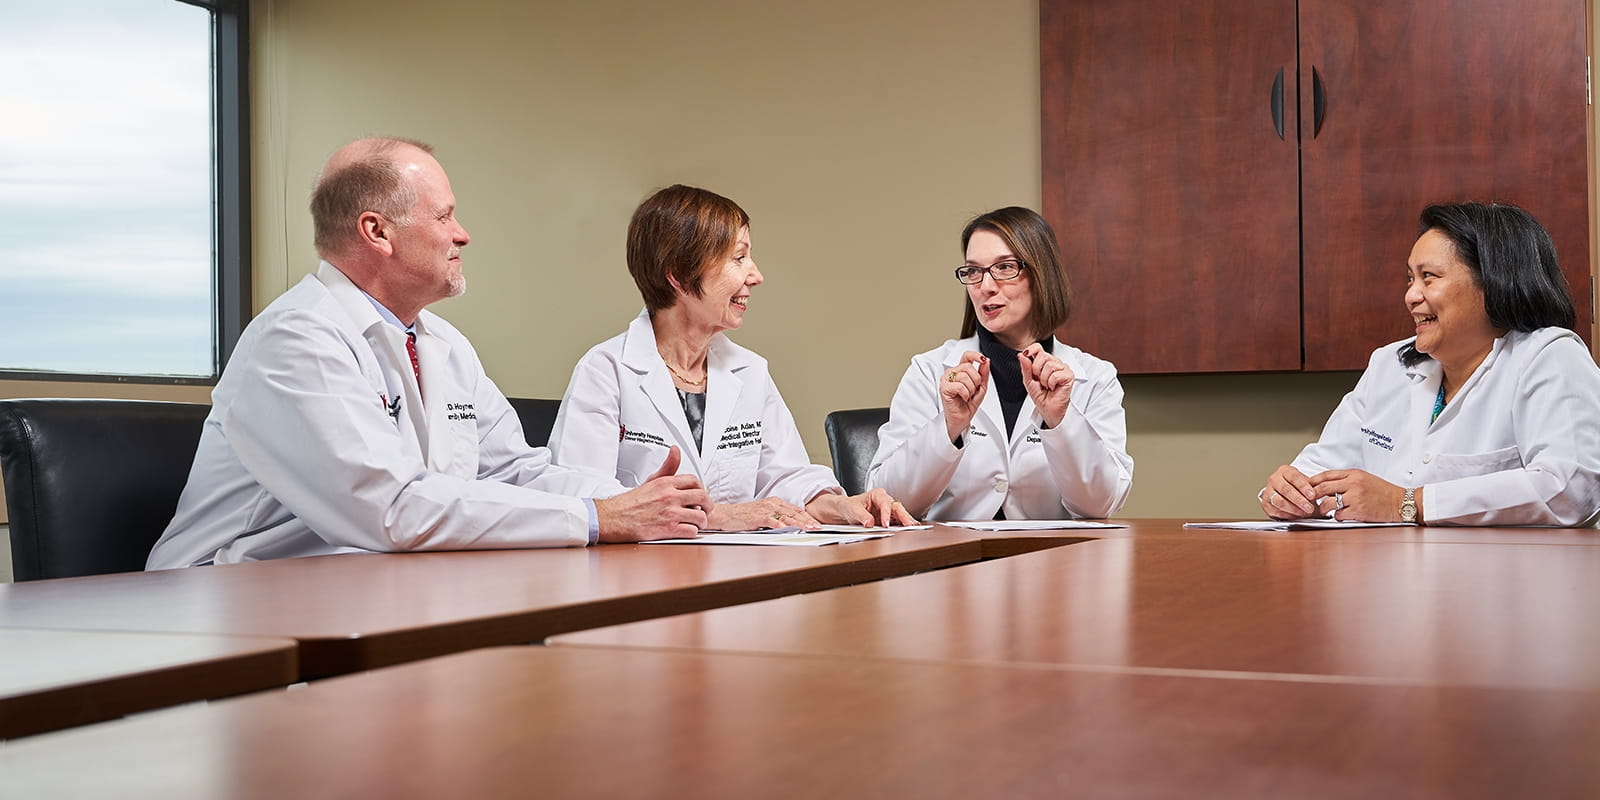 The UH Pain Management Institute team meets to ensure a holistic approach when treating patients with pain